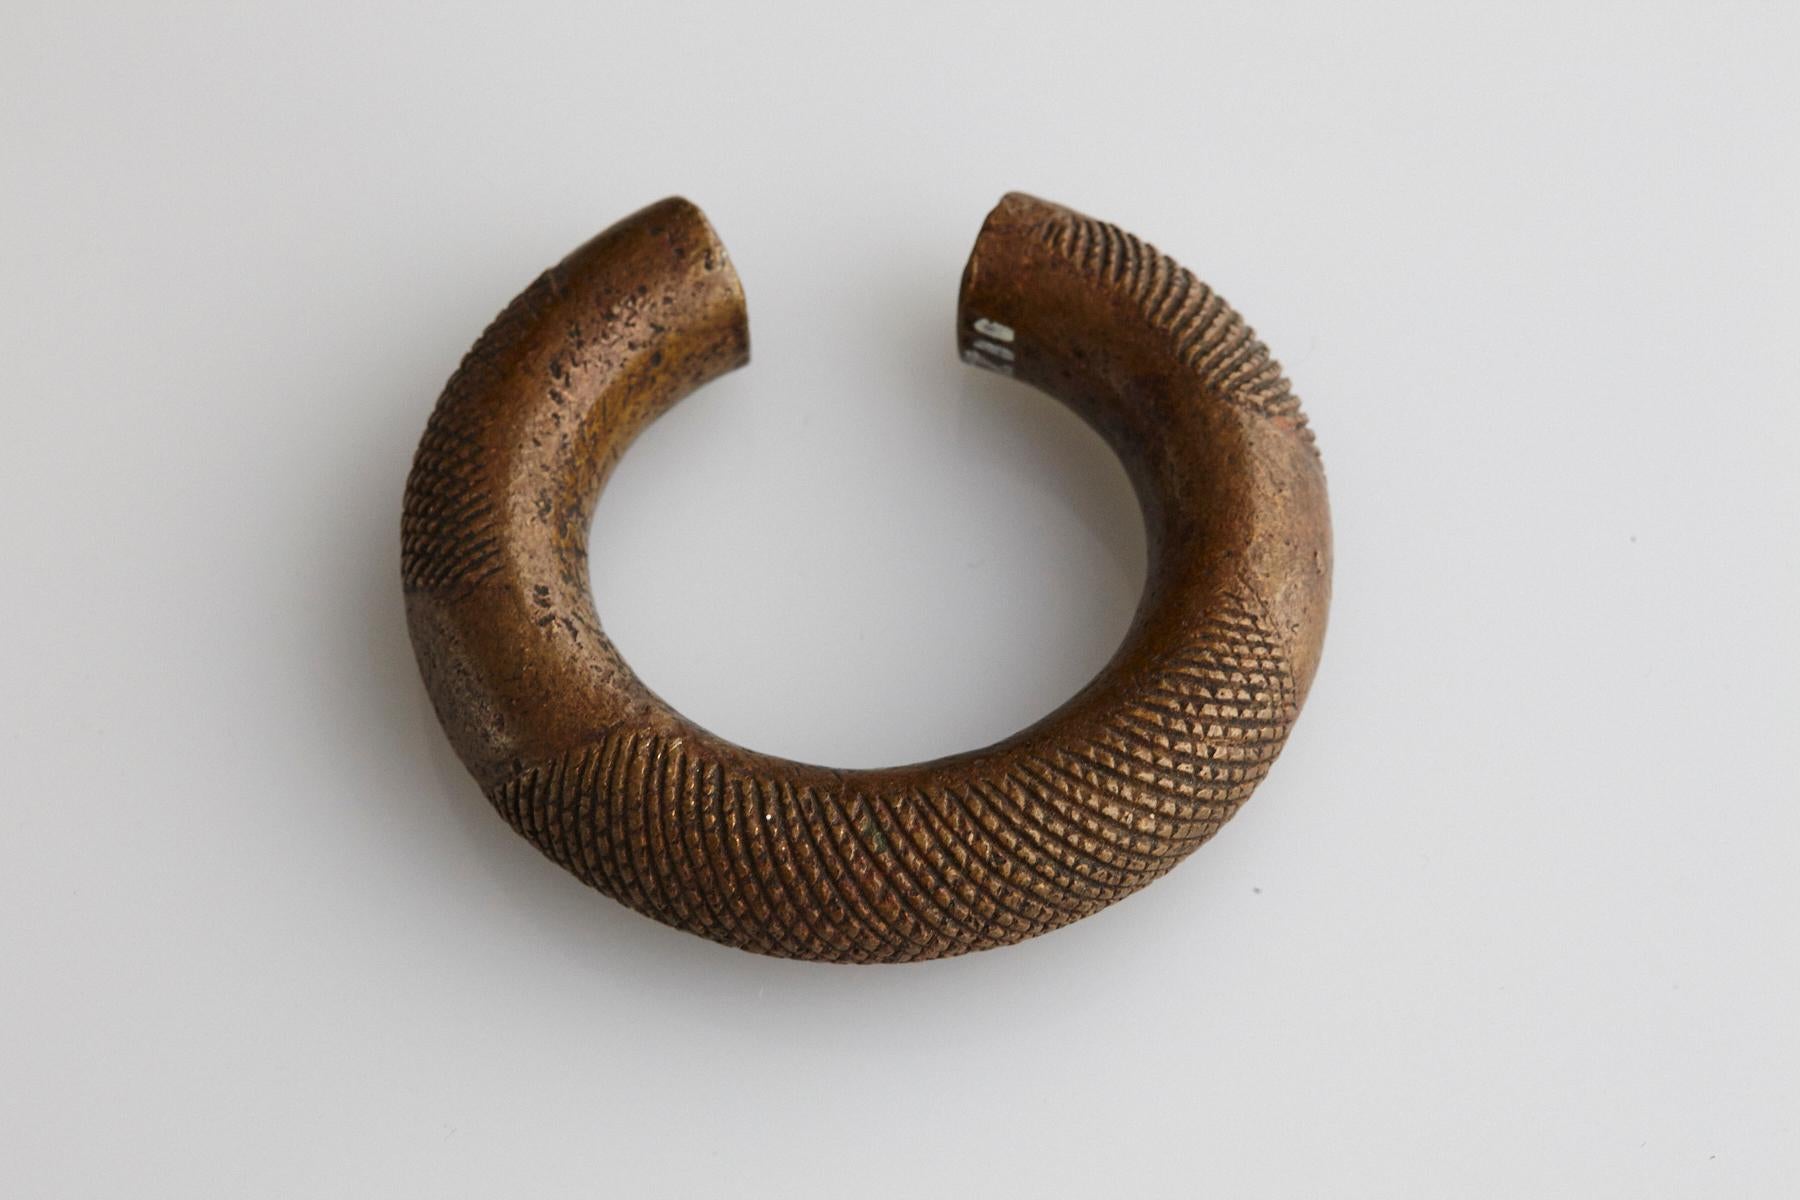 19th-century bronze currency bracelet / Manilla in horseshoe form with fixed opening. Intricate graphical design with a lattice pattern. This type of bracelet was worn or used by the Baoule and Dogon People, who are living in Burkina Faso and Cote